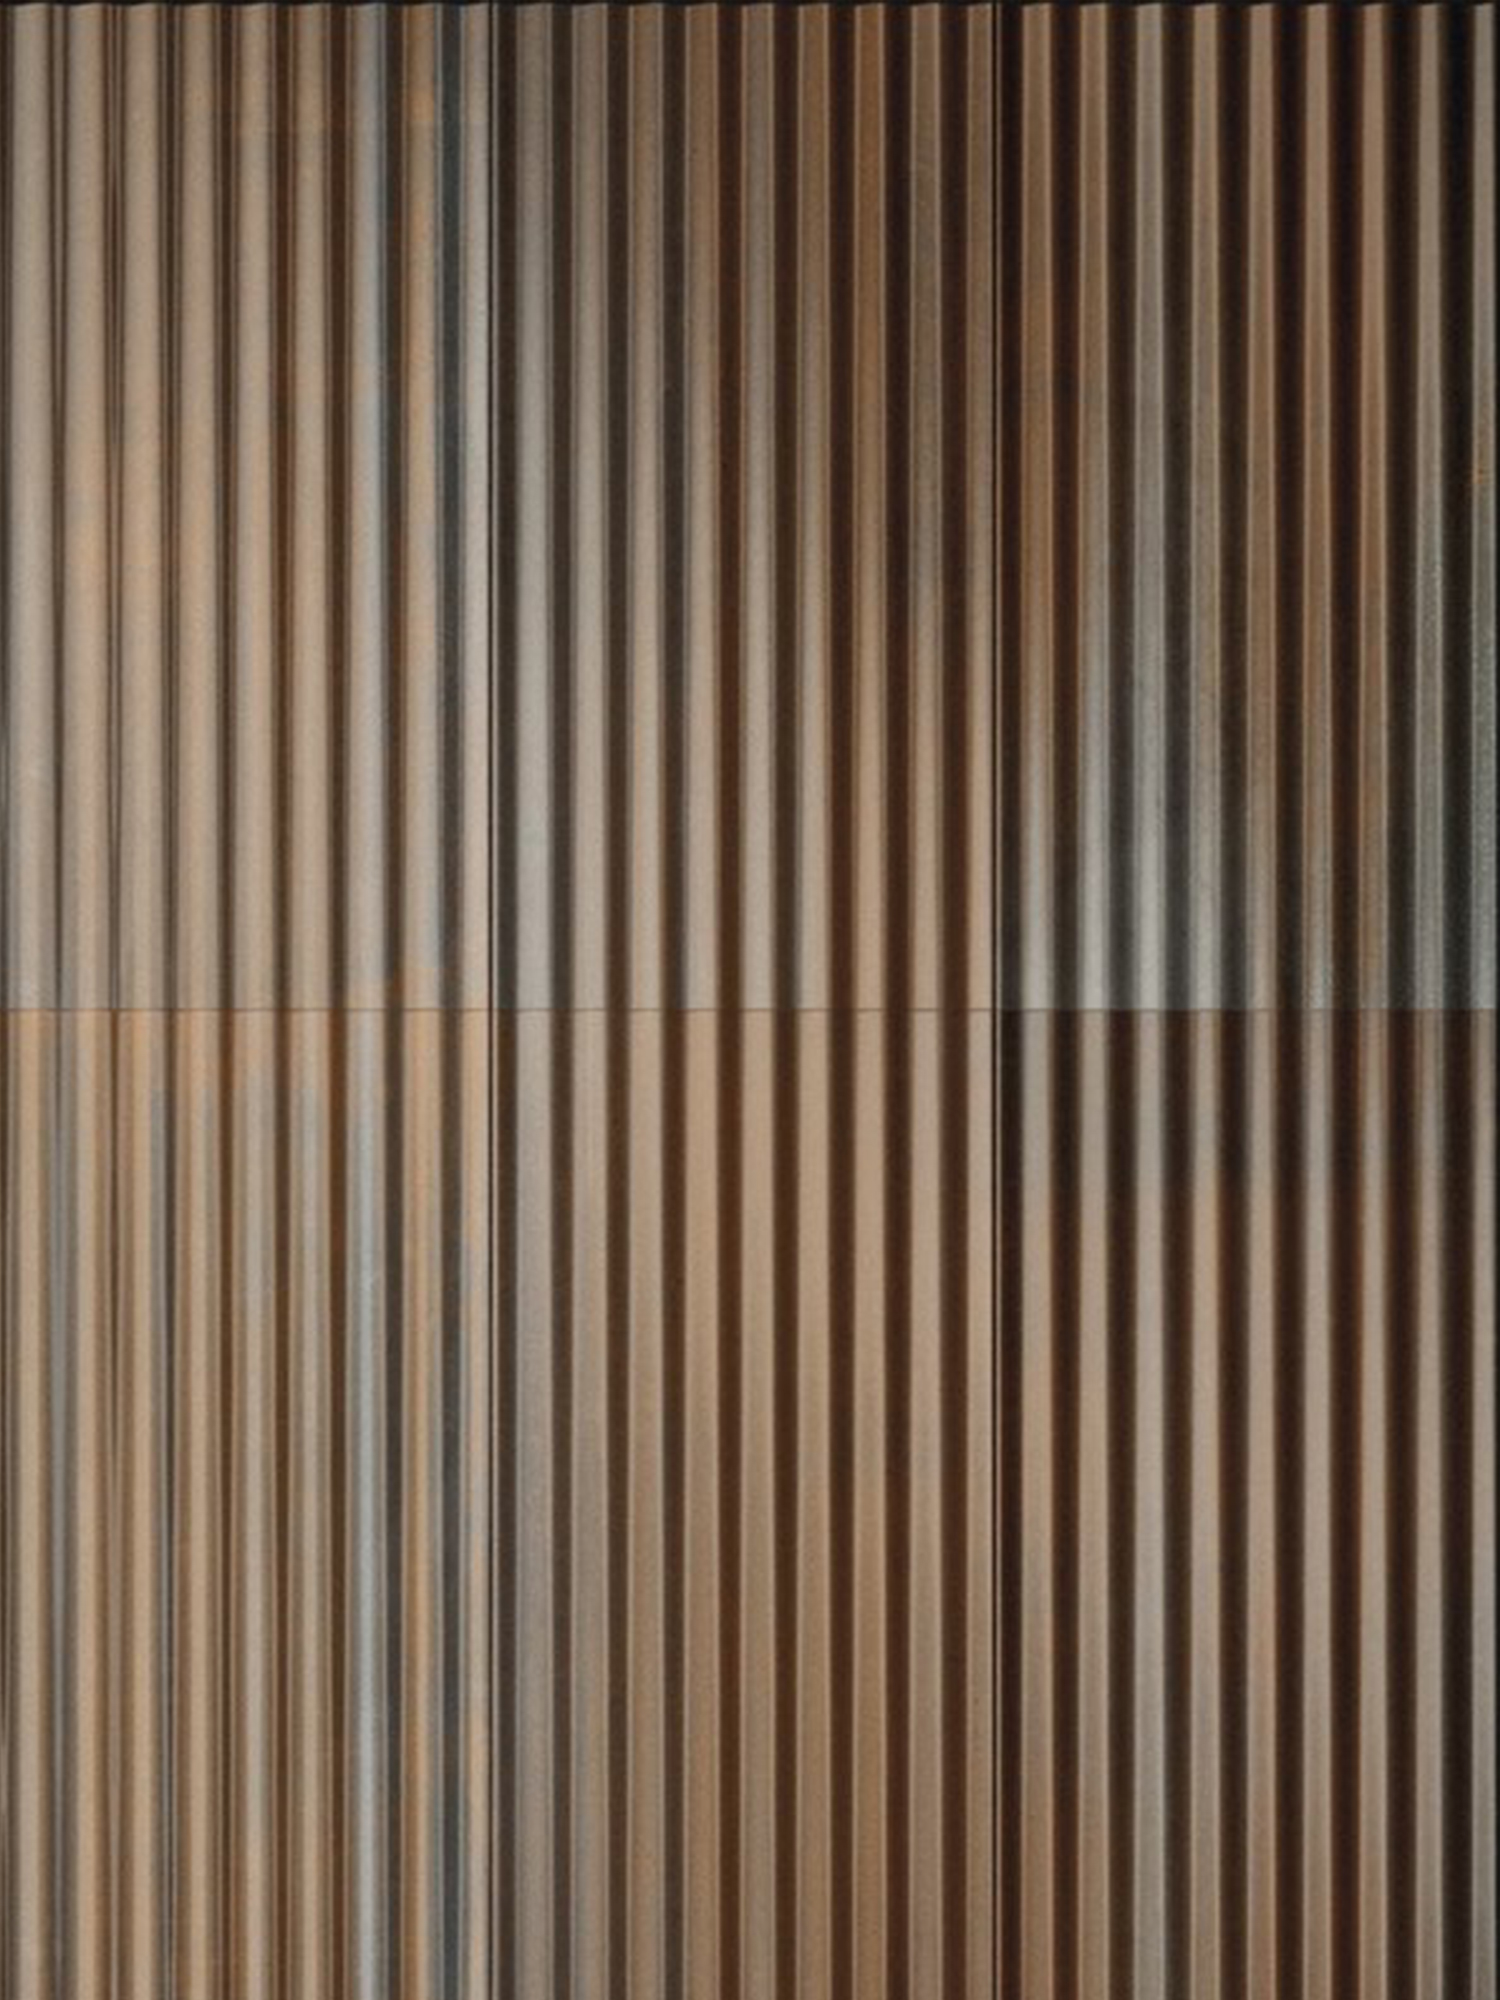 RIBBED OXIDE - WALL TILES, Rusty